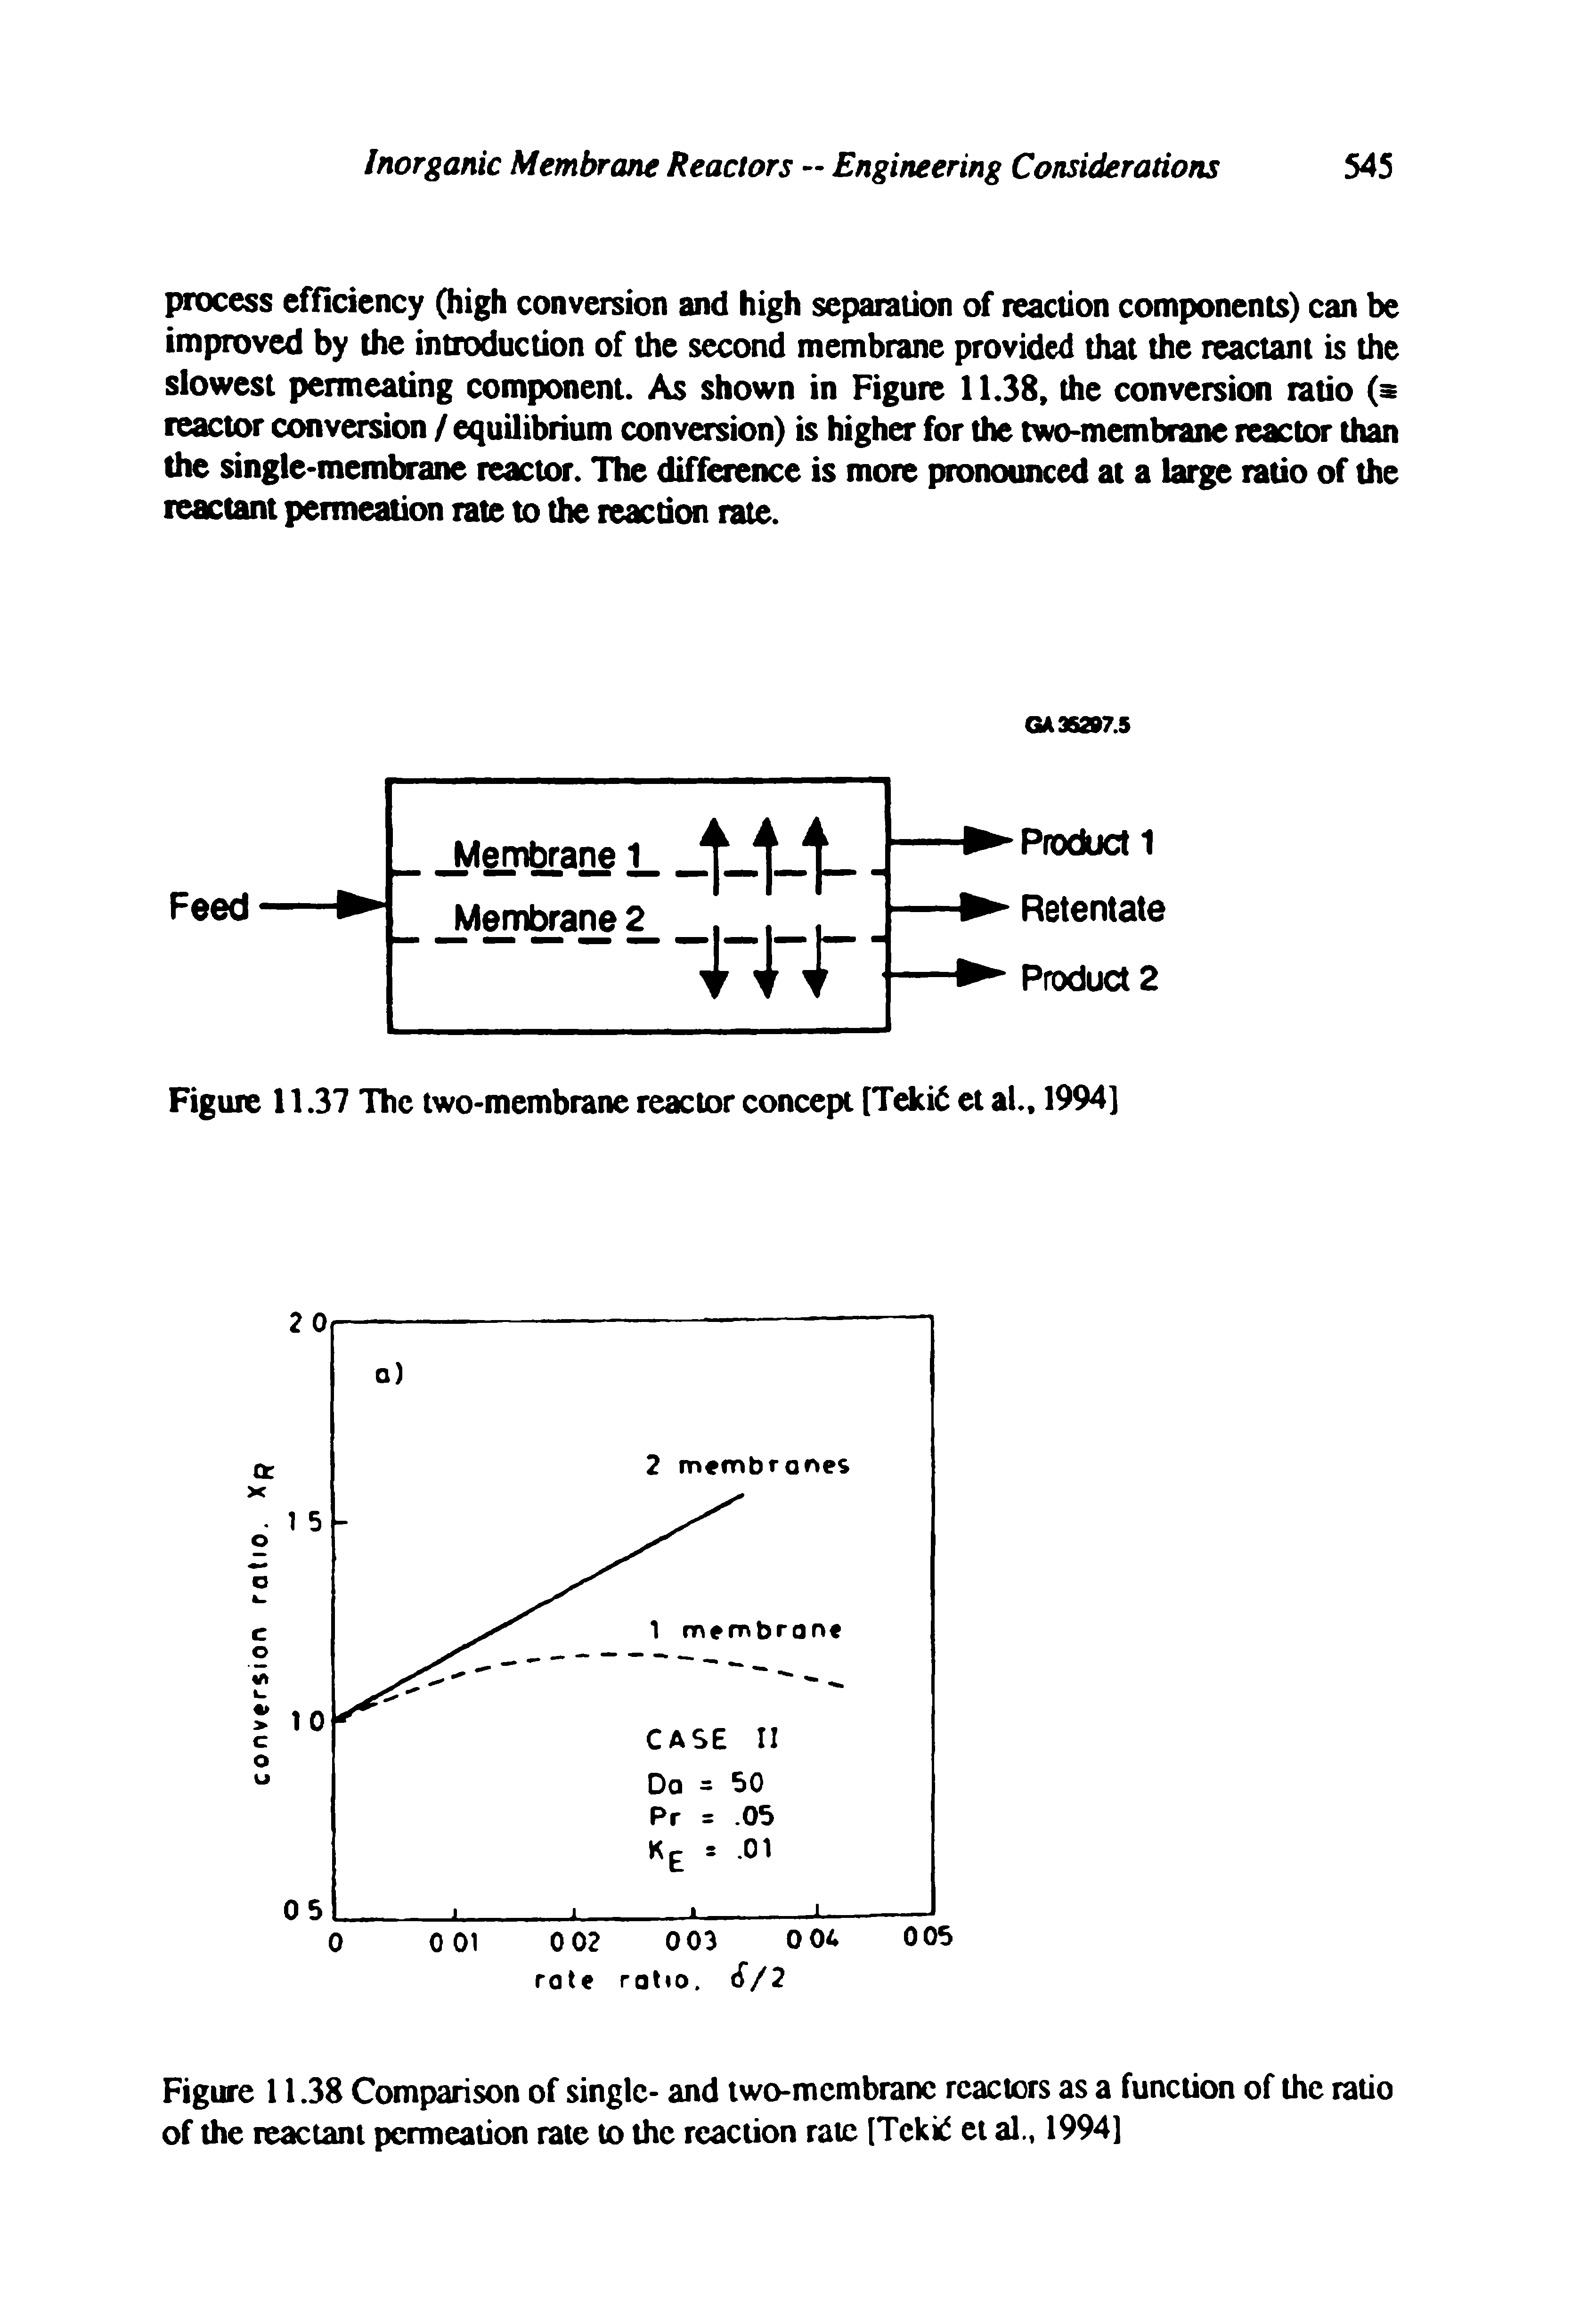 Figure 11.38 Comparison of single- and two-membrane reactors as a function of the ratio of the reactant permeation rale to the reaction rate [Tekid et al., 1994]...